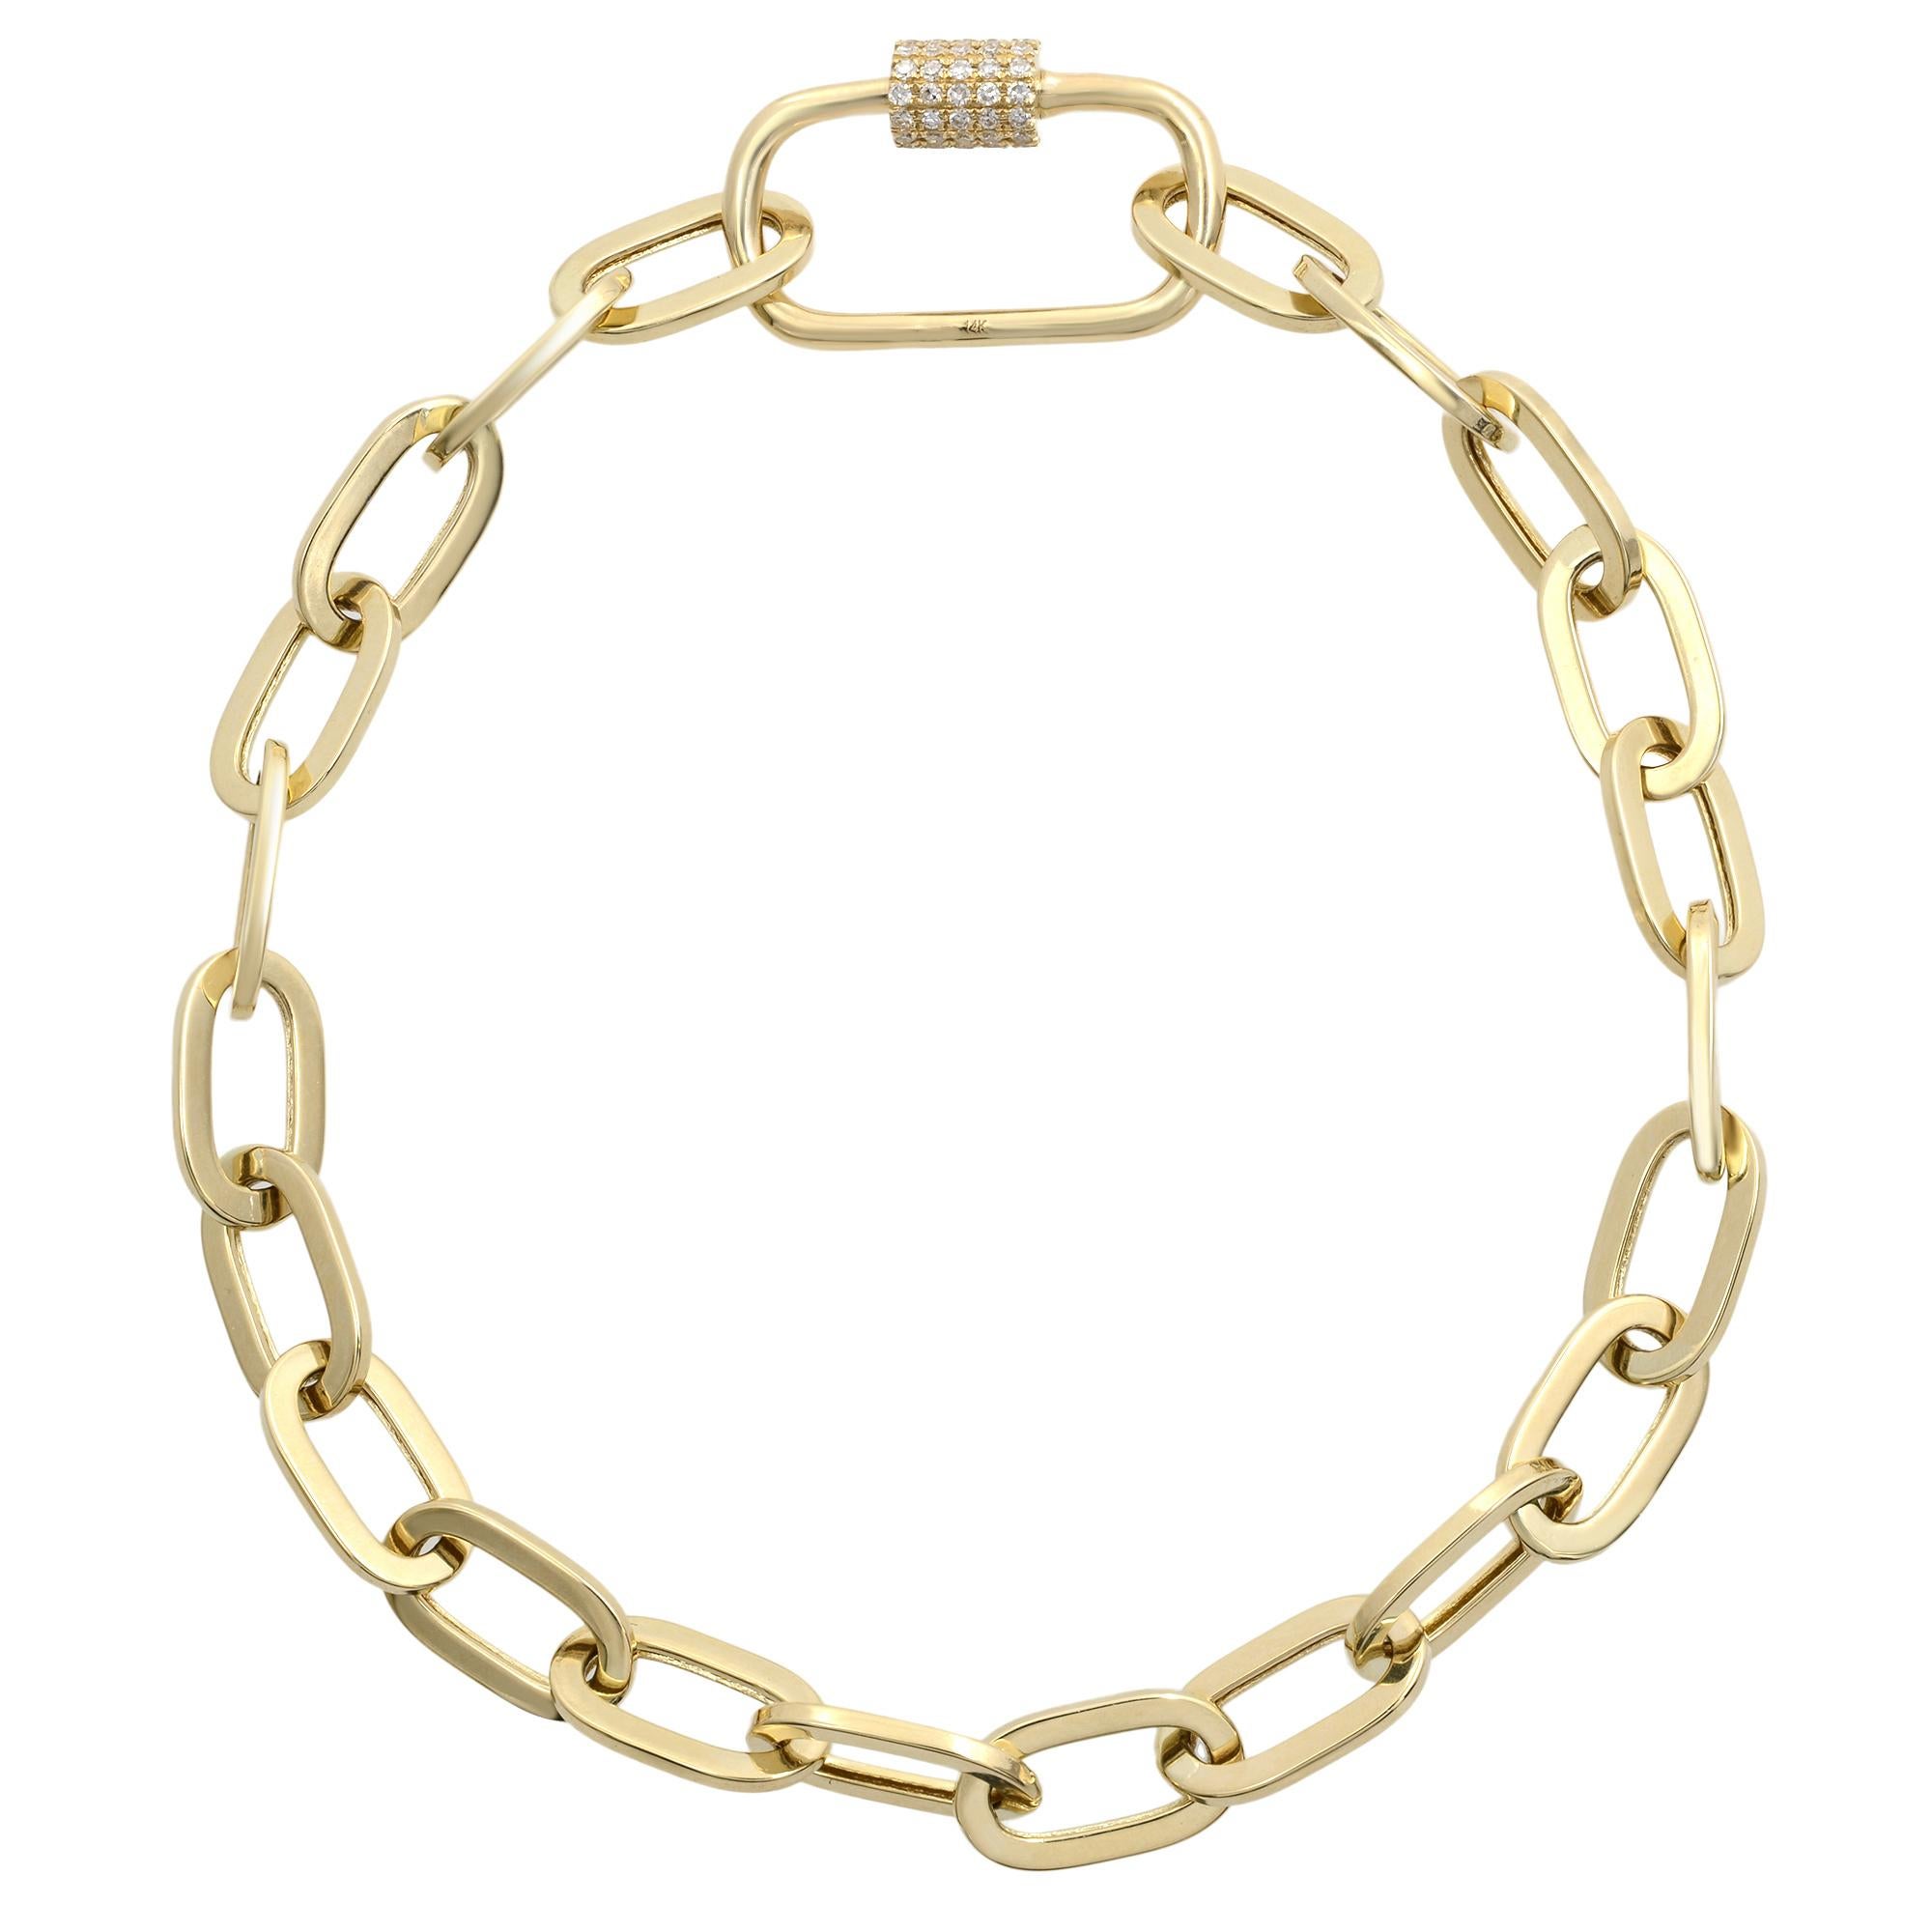 Get the perfect complementary everyday look with this weightless paperclip bracelet crafted in high polish 14K yellow gold. It's stackable and easy to mix and match. This bracelet features paper clip links. Each link measuring 9.7mm x 5.5mm each